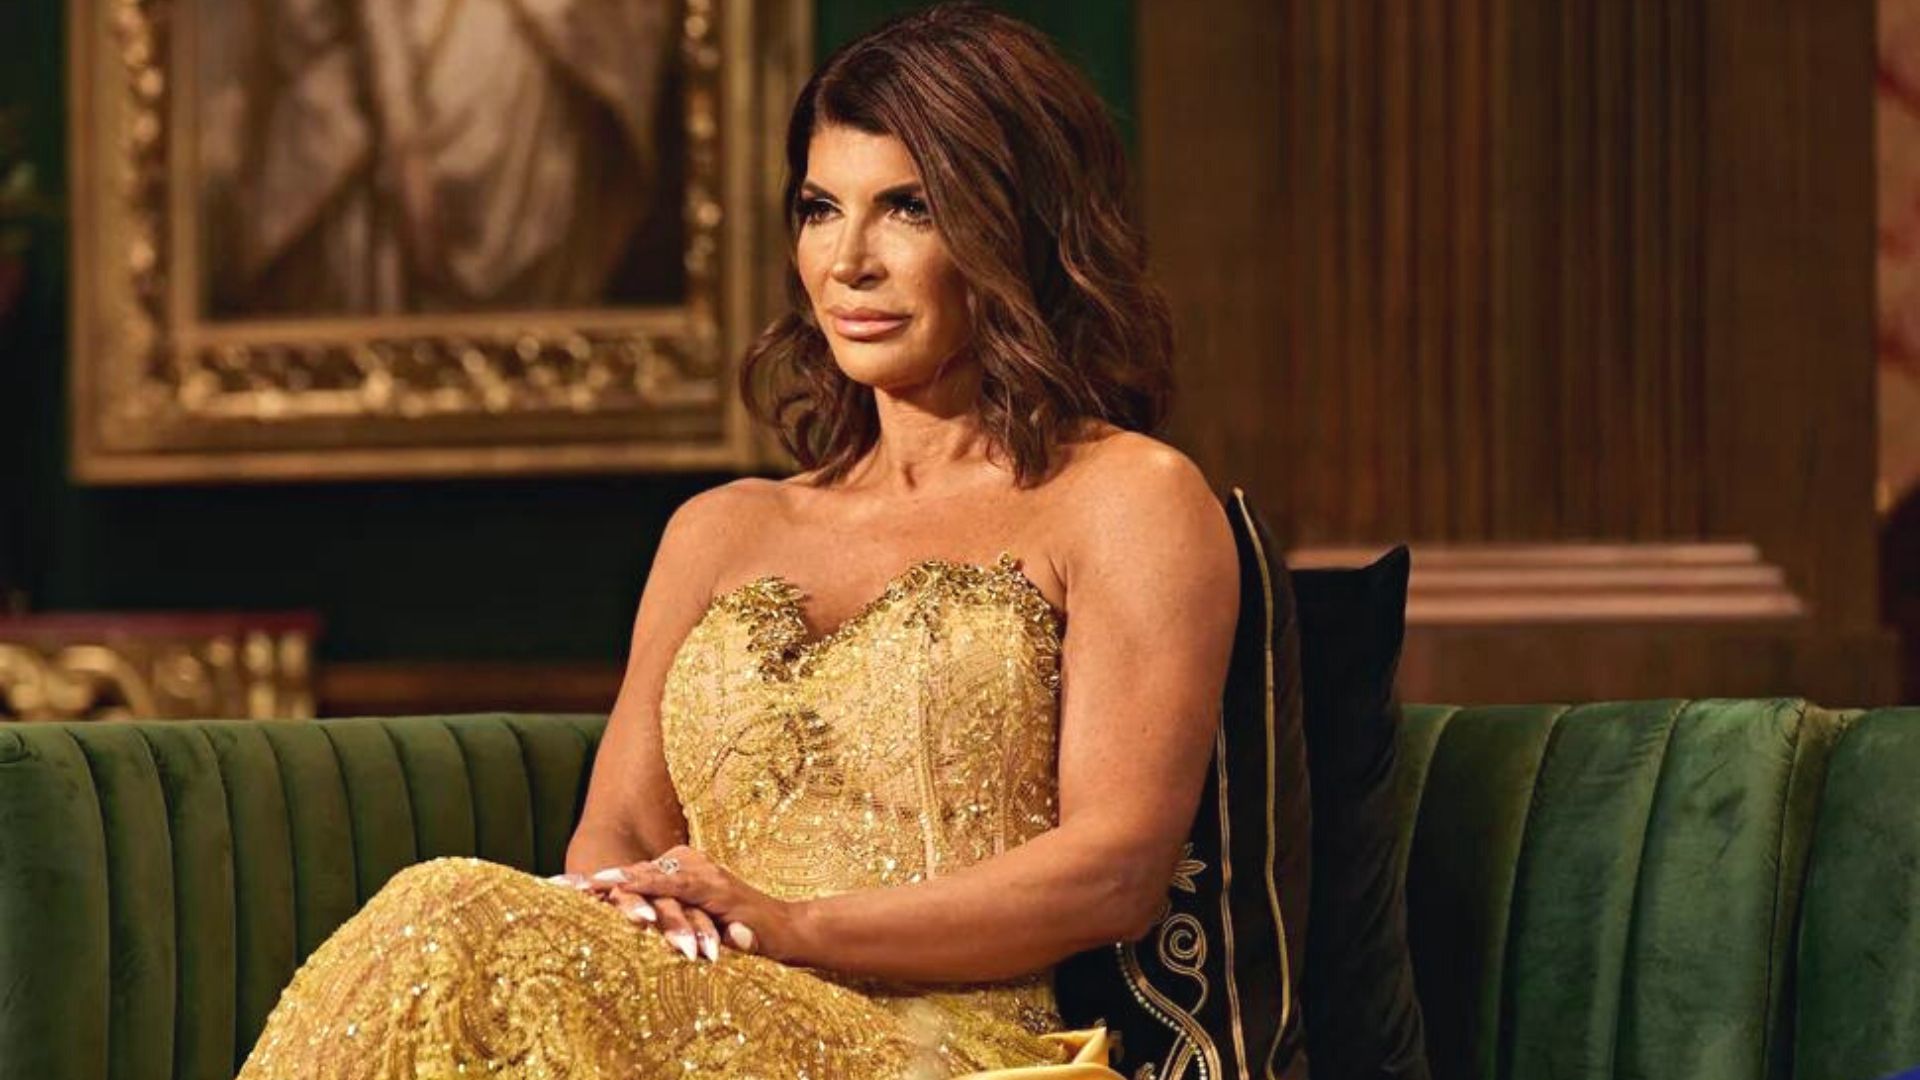 Watch The Real Housewives of New Jersey Season 12, Episode 13